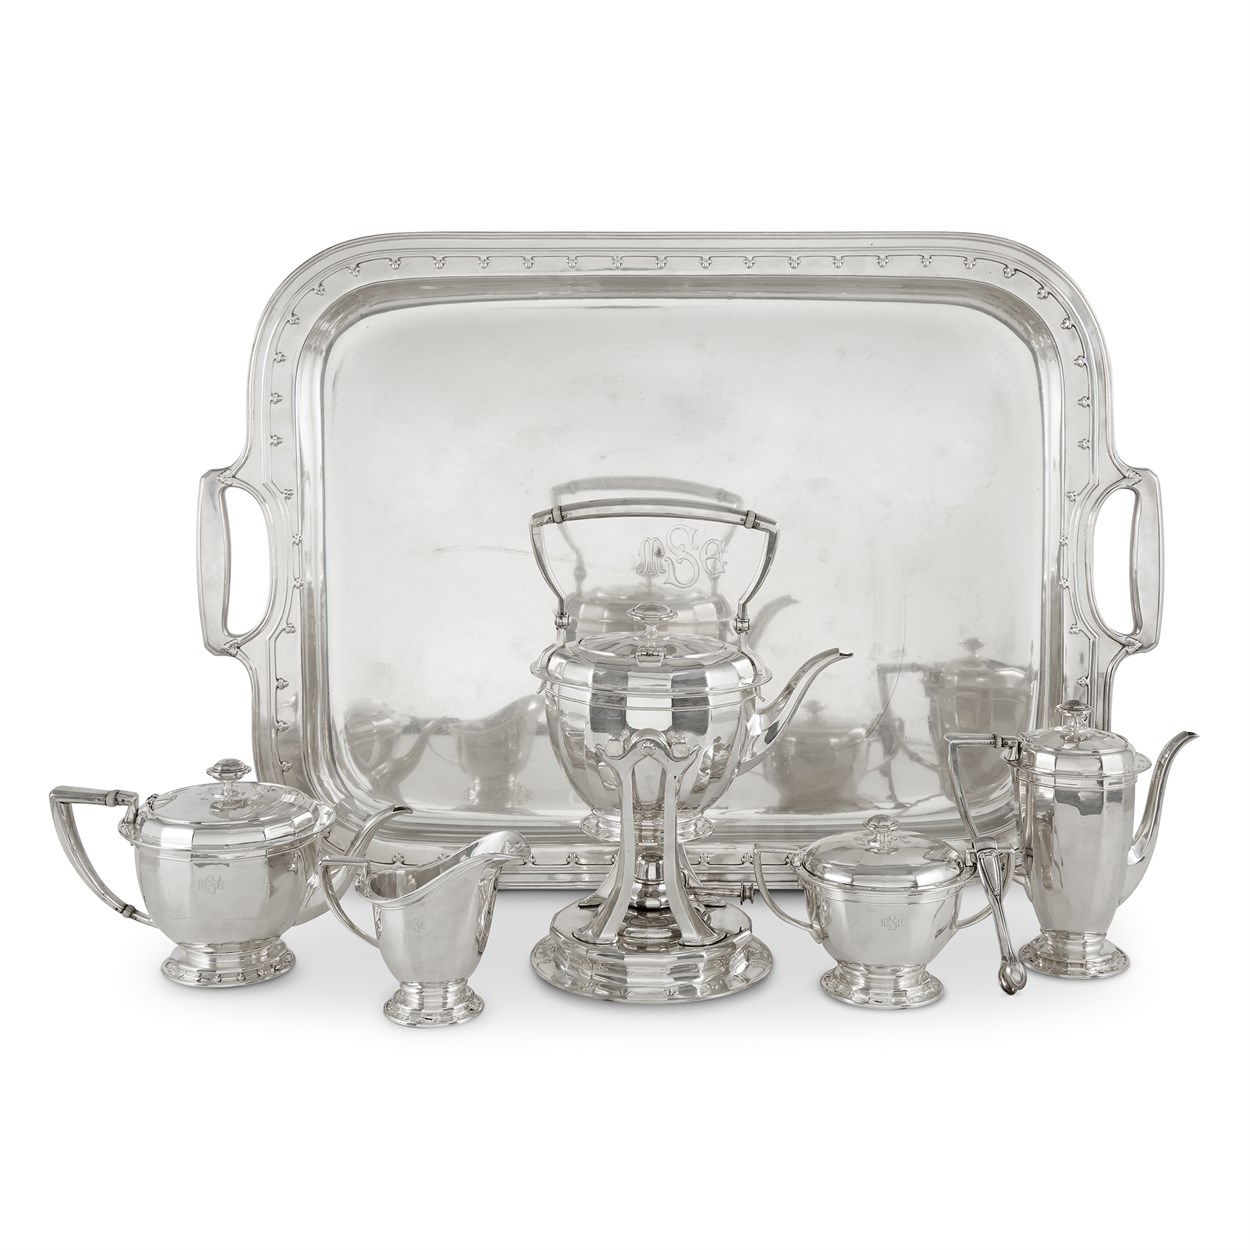 Lot 79 - An American sterling silver six-piece tea and coffee service